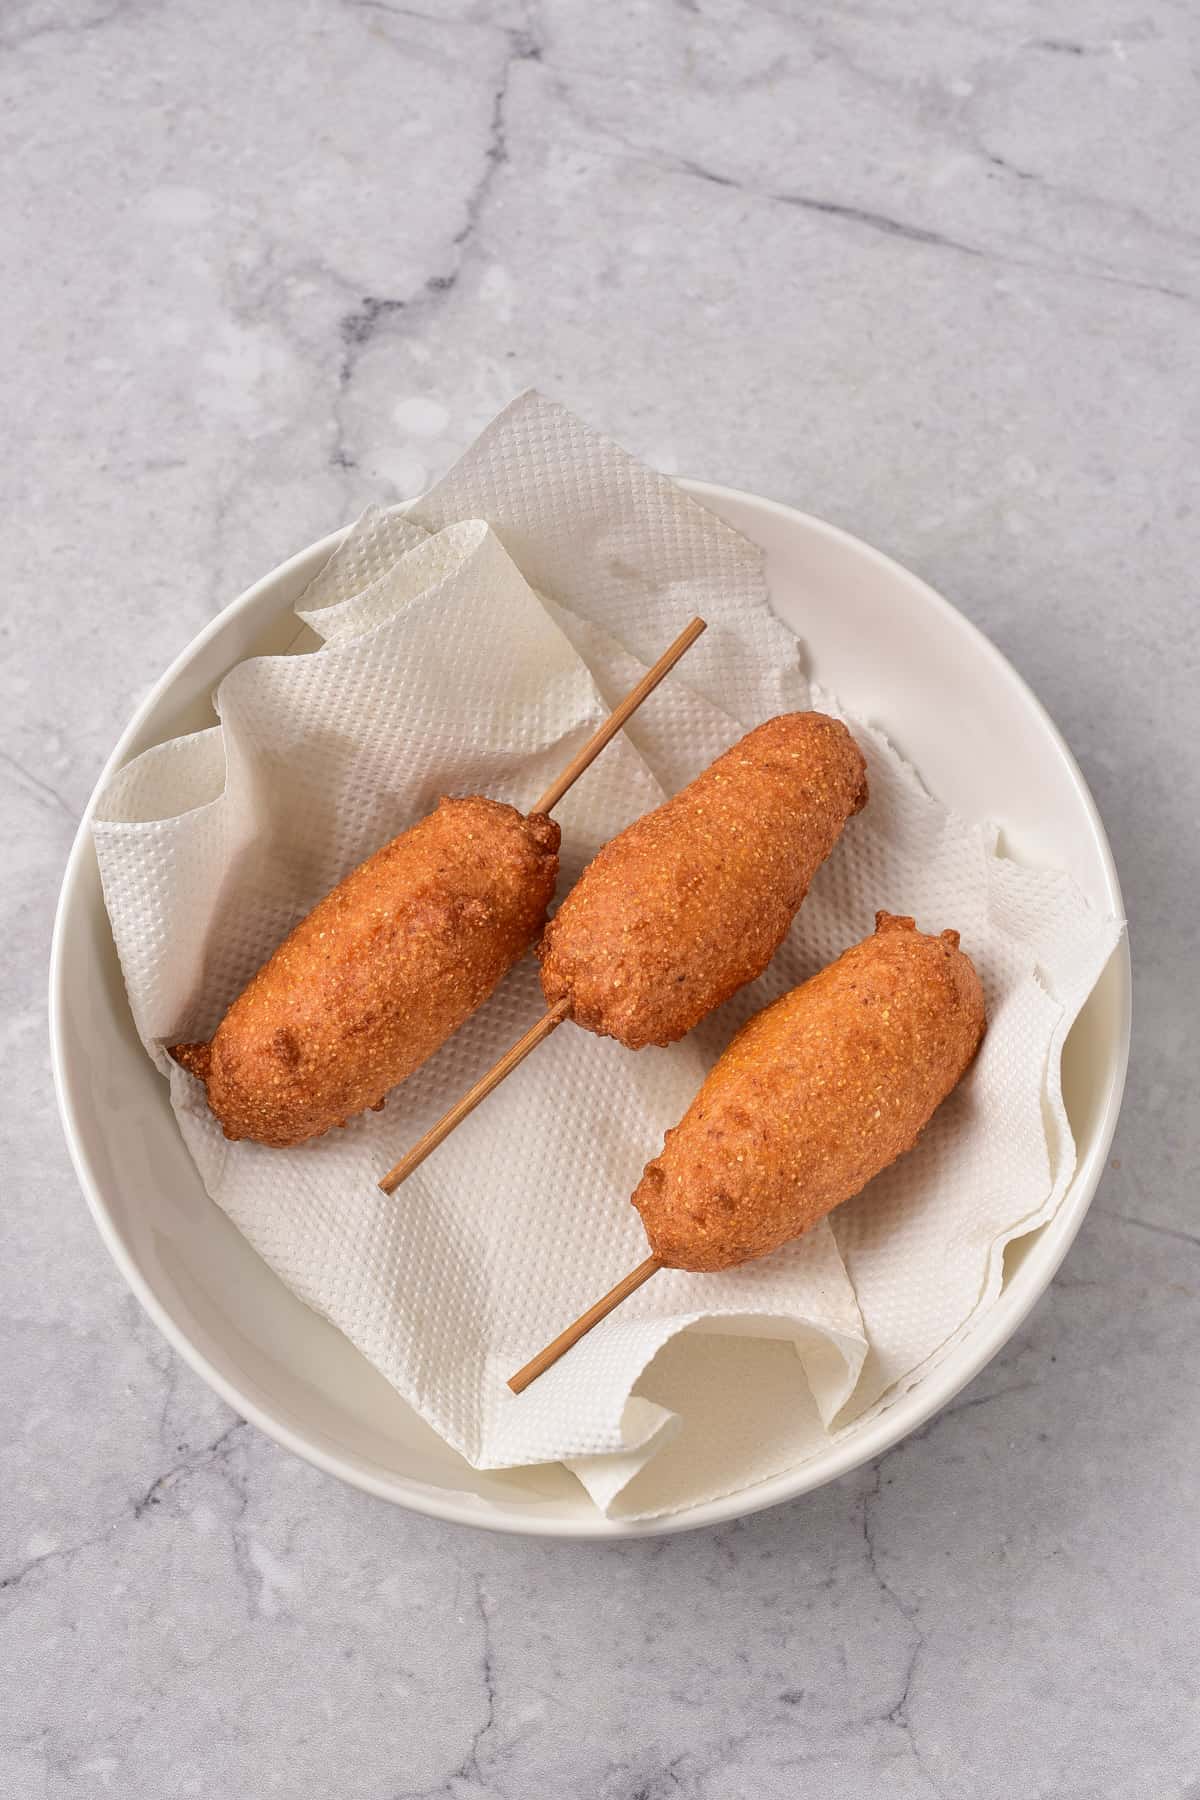 Cooked corn dogs draining on a dish lined with paper towels.